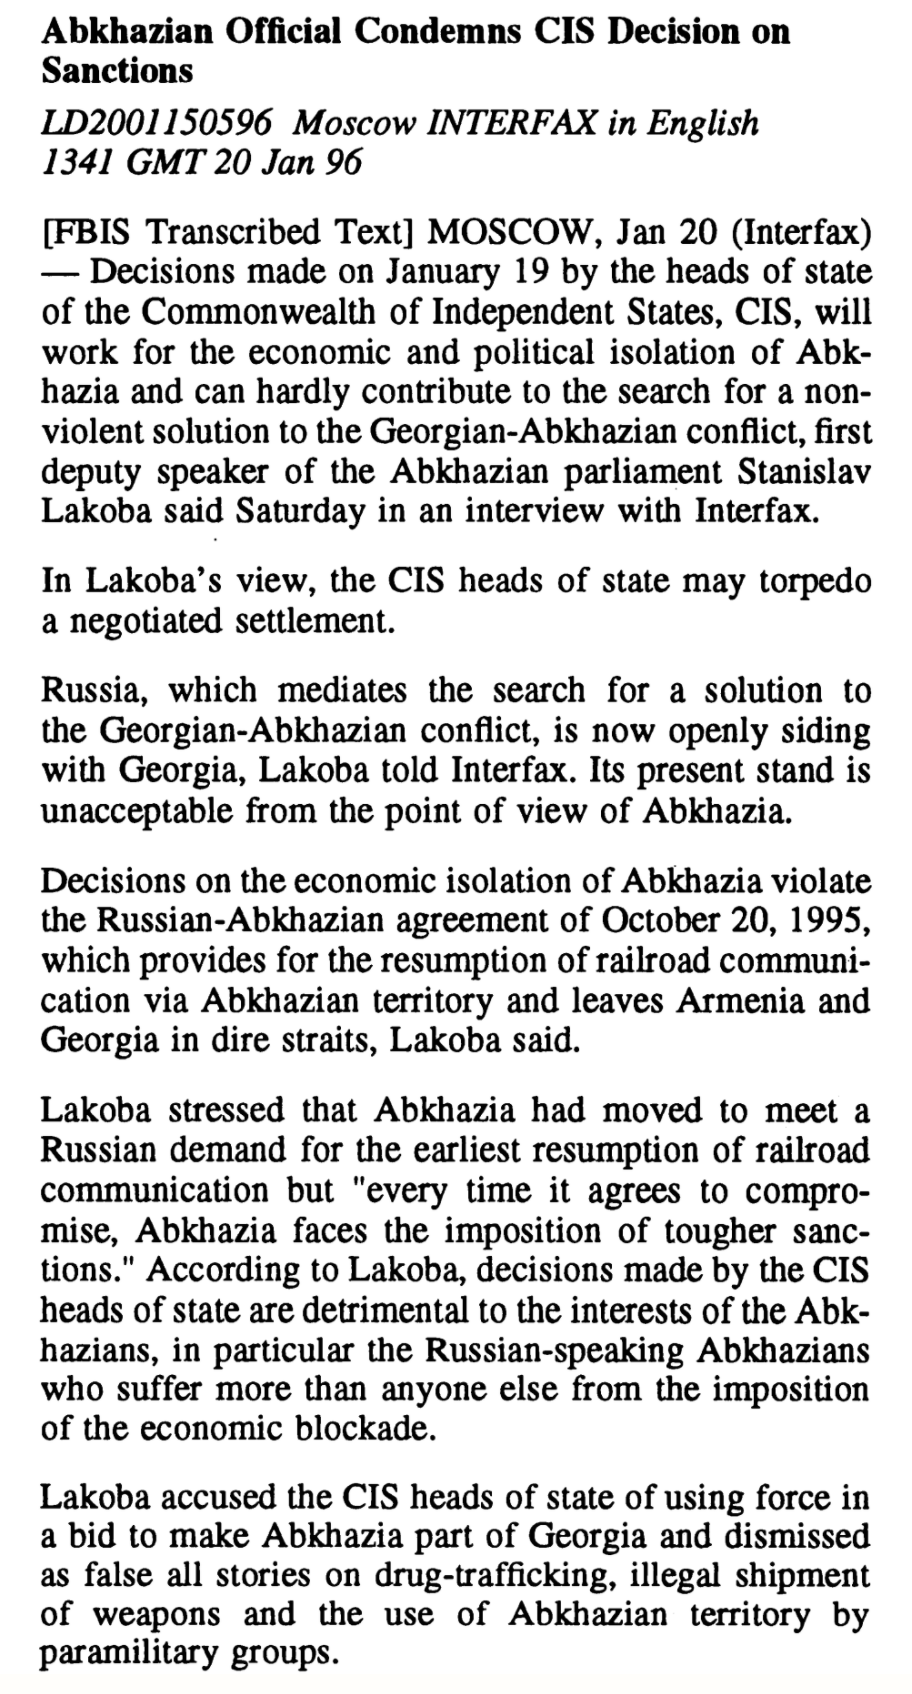 Abkhazian Official Condems CIS Decision on Sanctions. Moscow INTERFAX in English. January 20, 1996